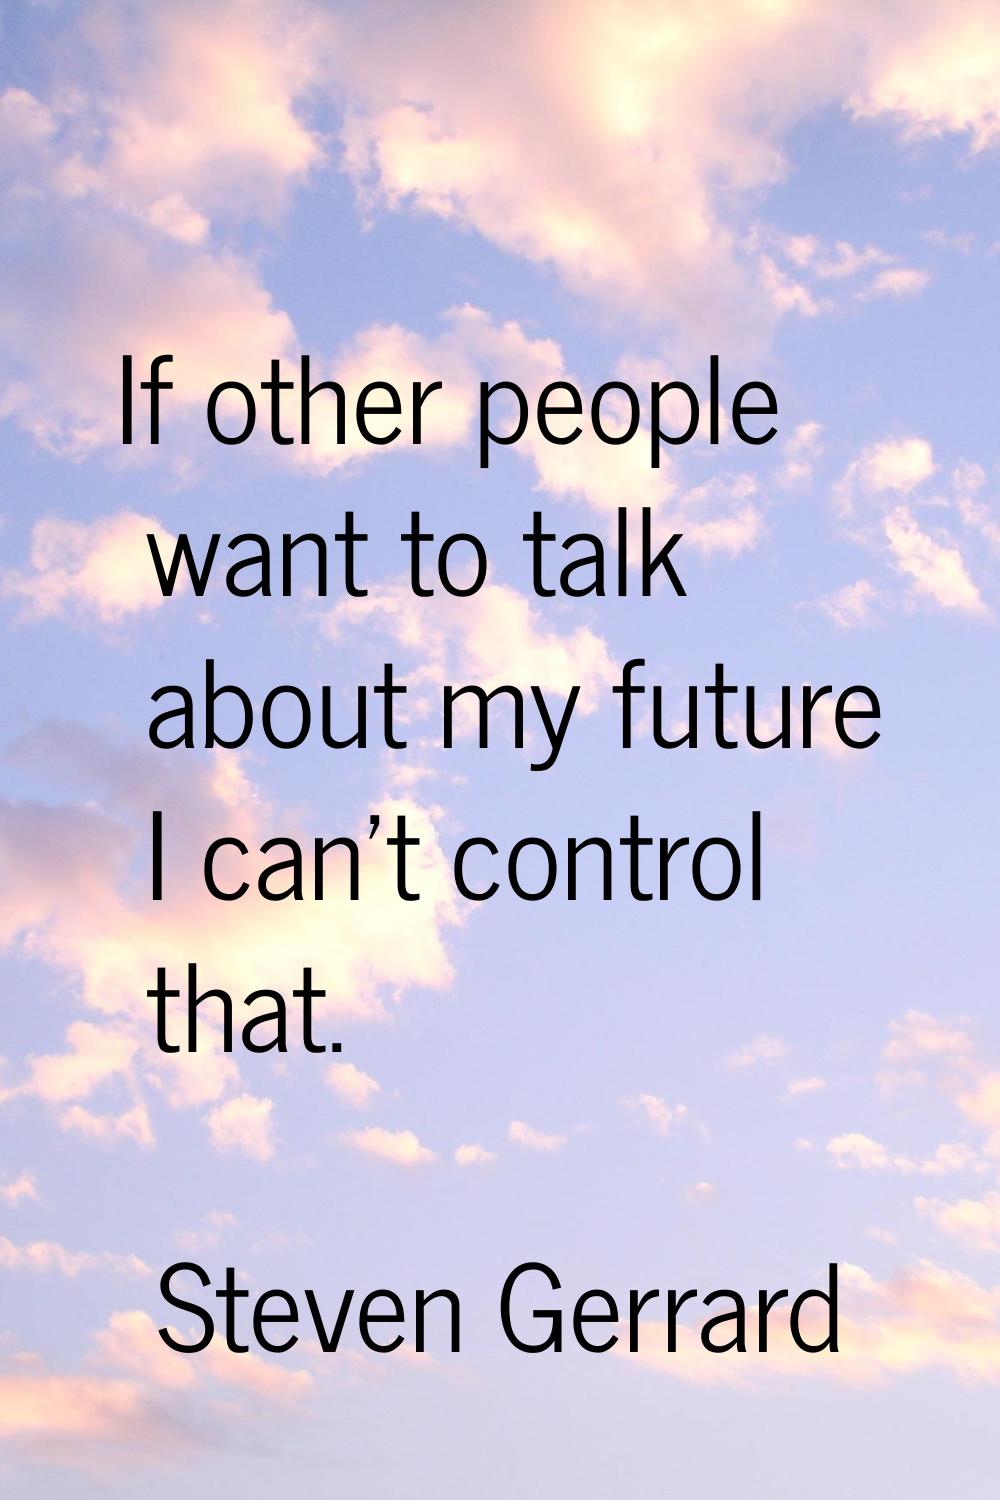 If other people want to talk about my future I can't control that.